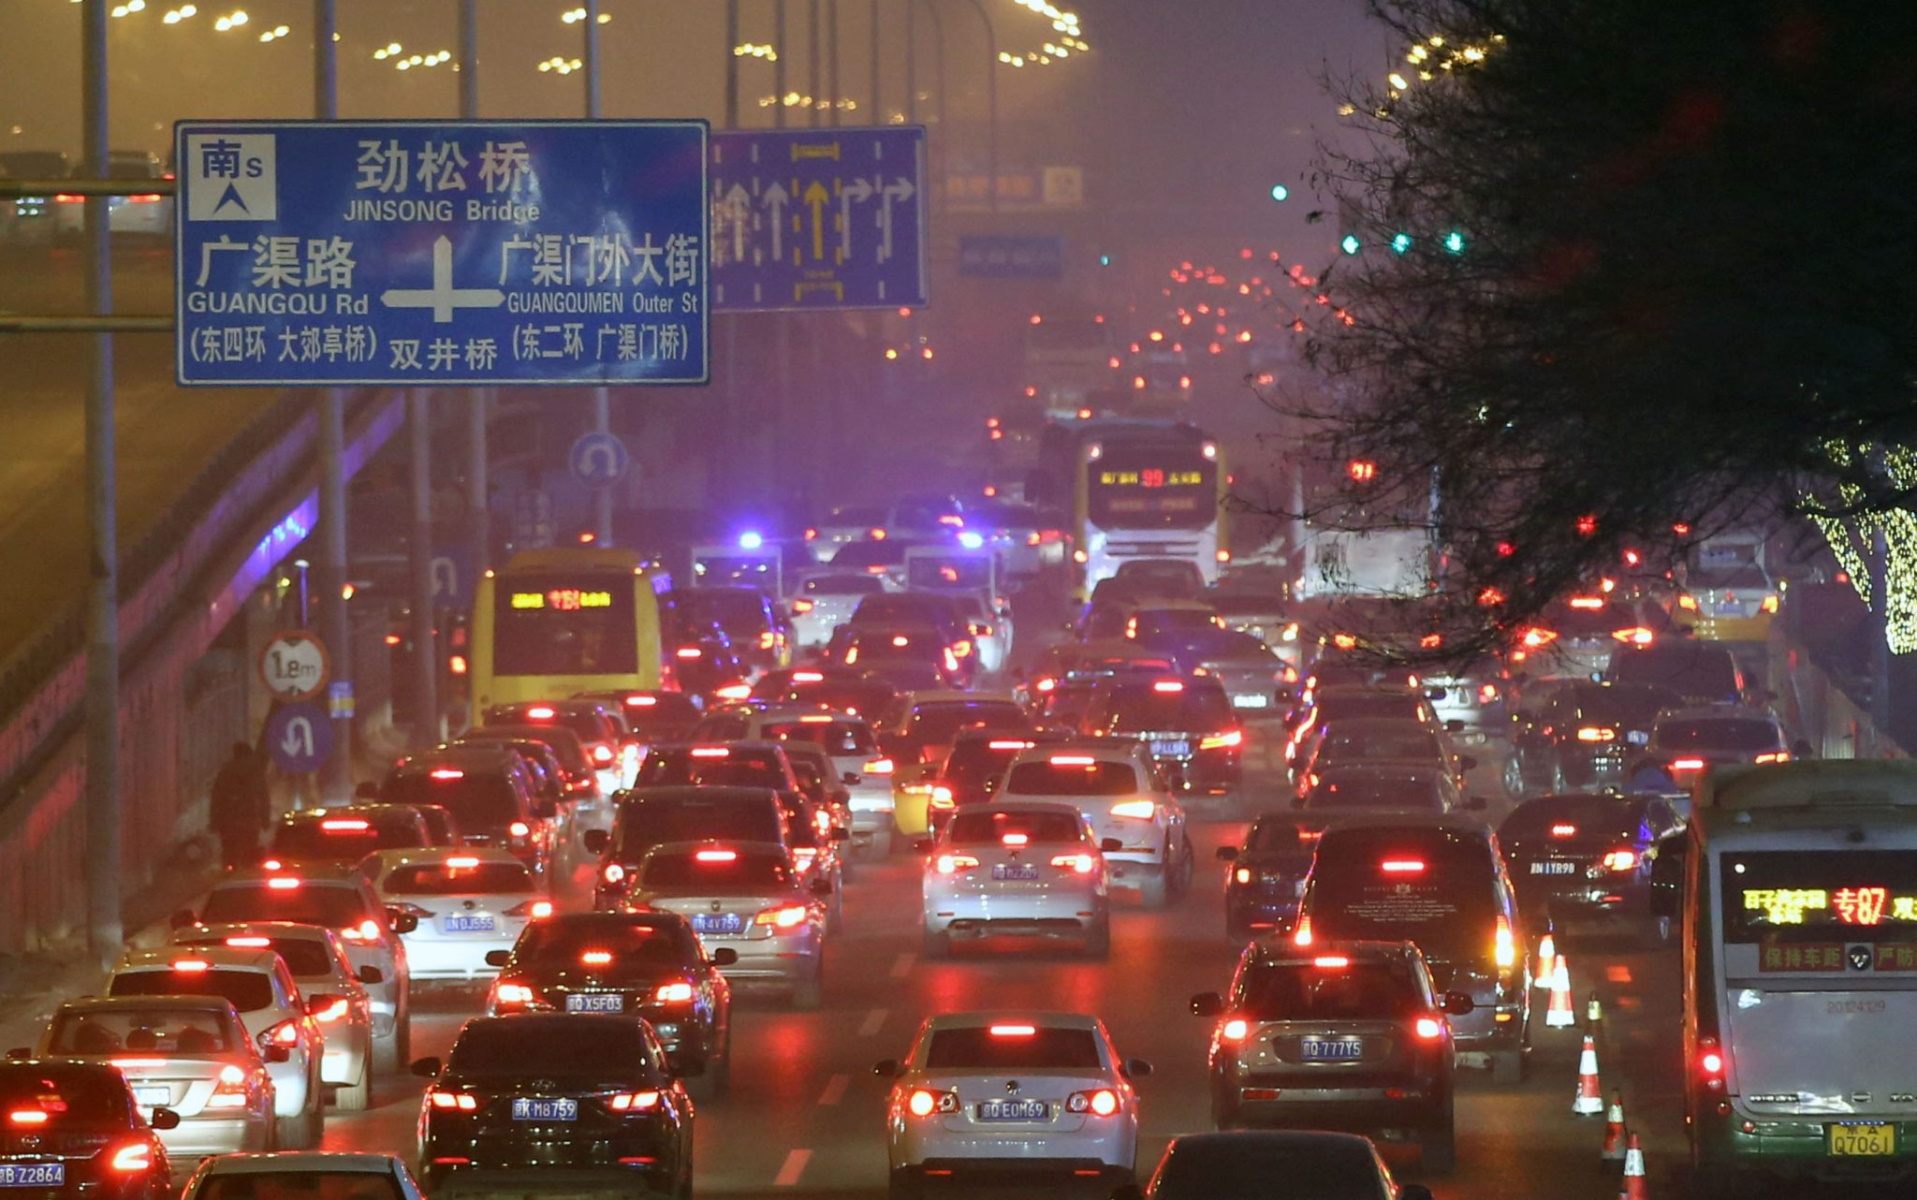 Vehicles drive along a road Beijing, China in heavy smog on Jan. 3, 2017. (Getty Images)